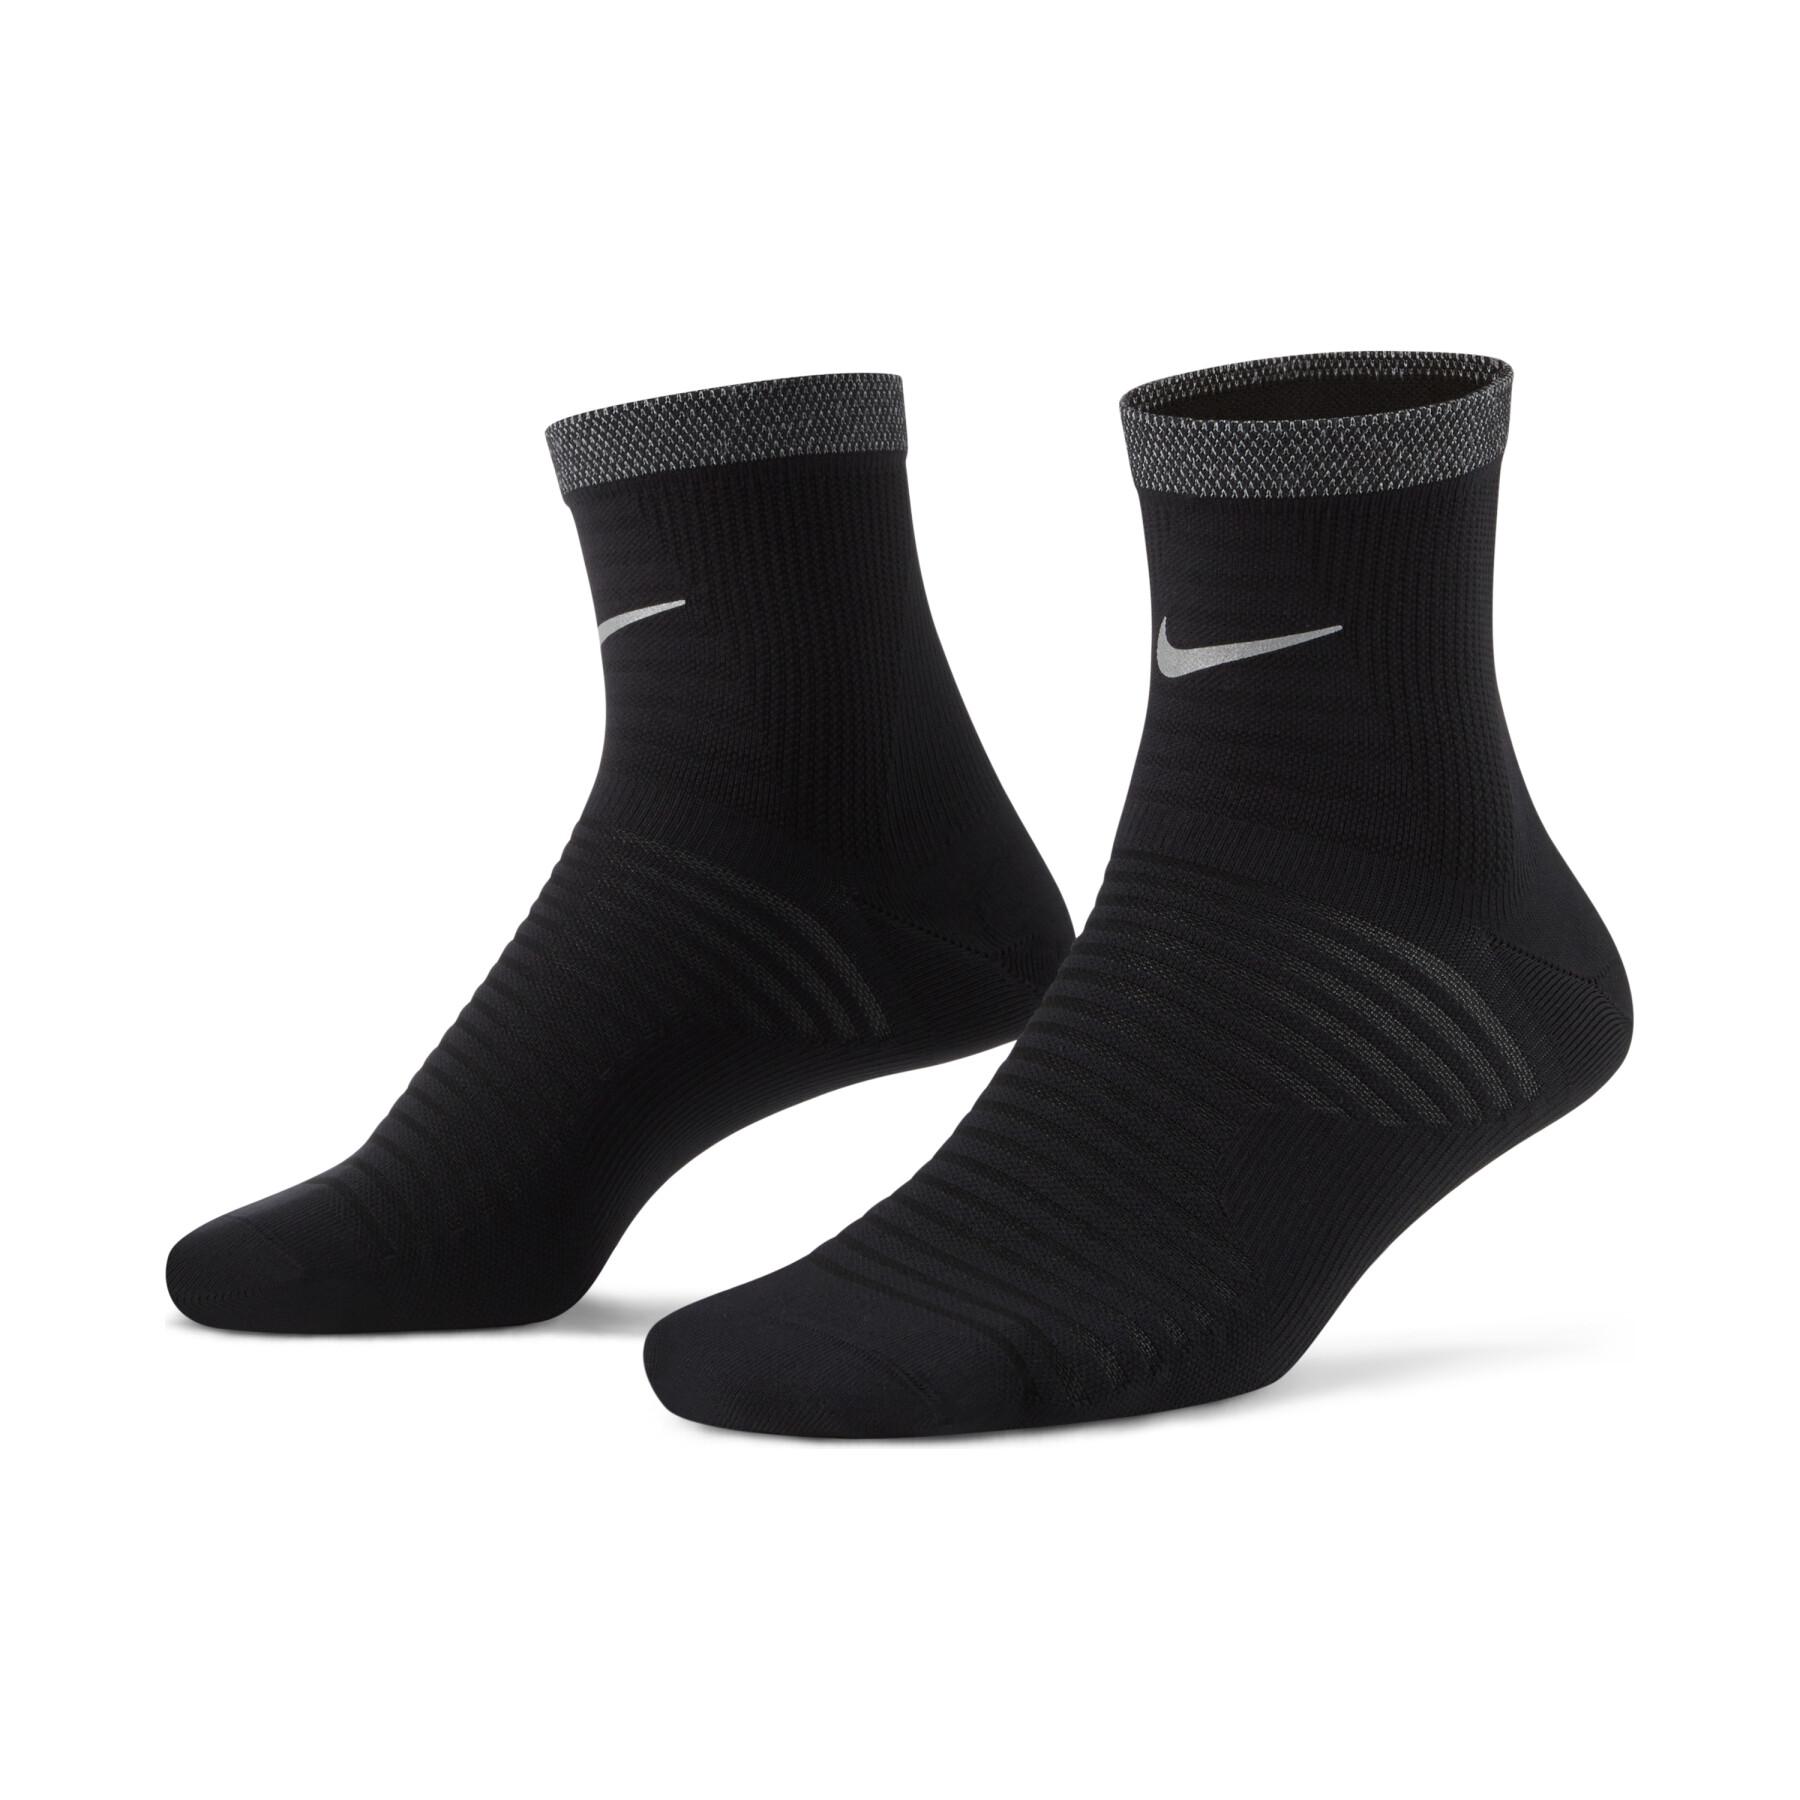 Chaussettes Nike Spark Lightweight - Nike - Chaussettes